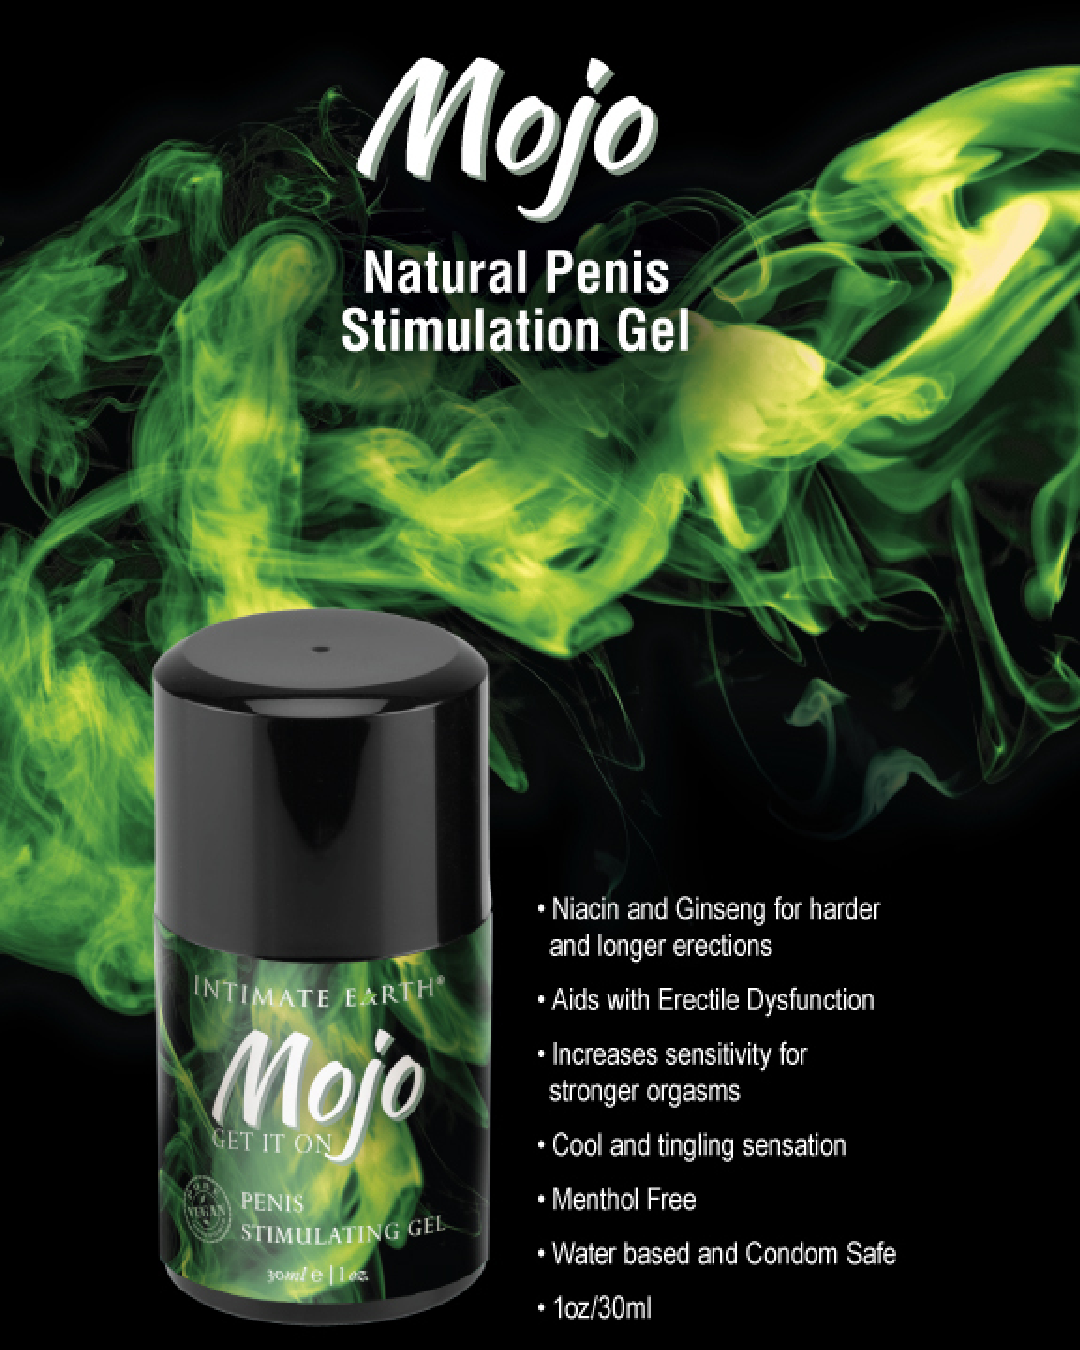 Mojo Penis Stimulating Gel by Intimate Earth 1 oz with benefits listed